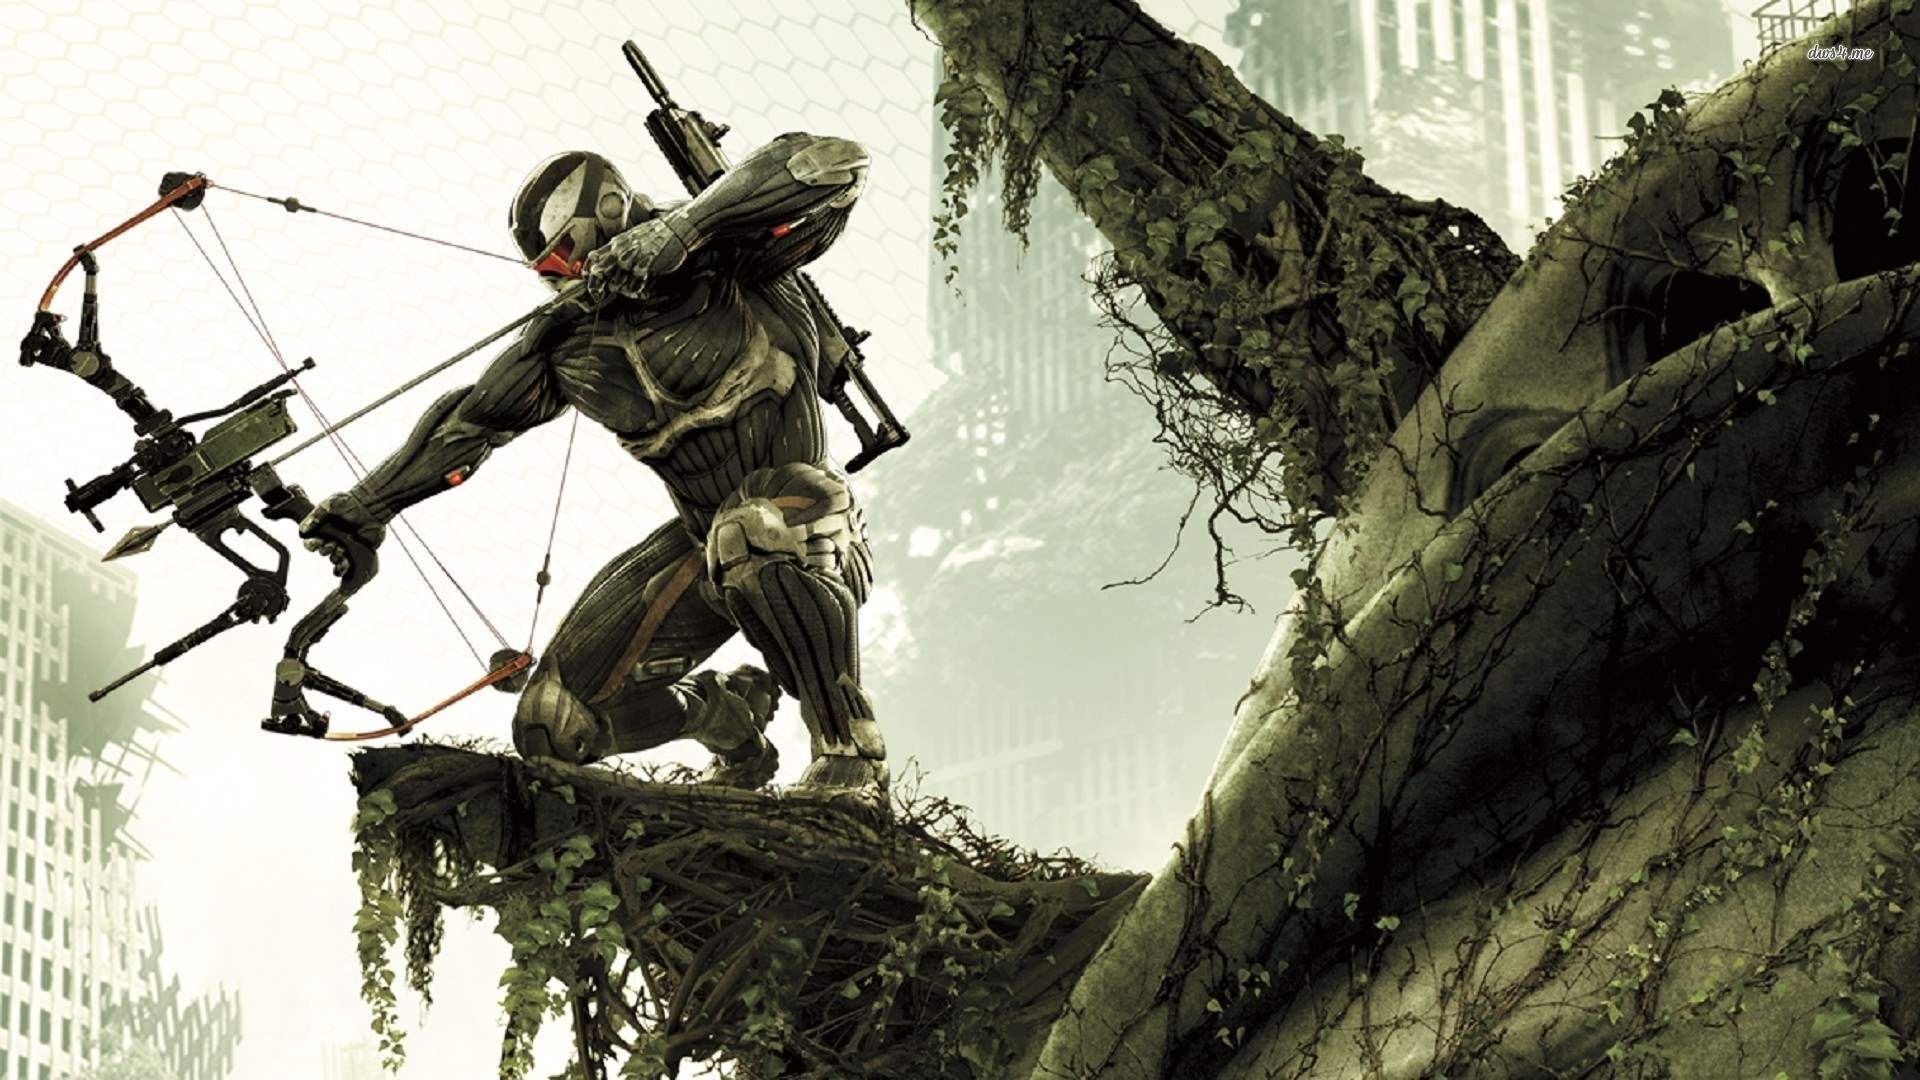 crysis 3 wallpaper,action adventure game,soldier,pc game,adventure game,compound bow